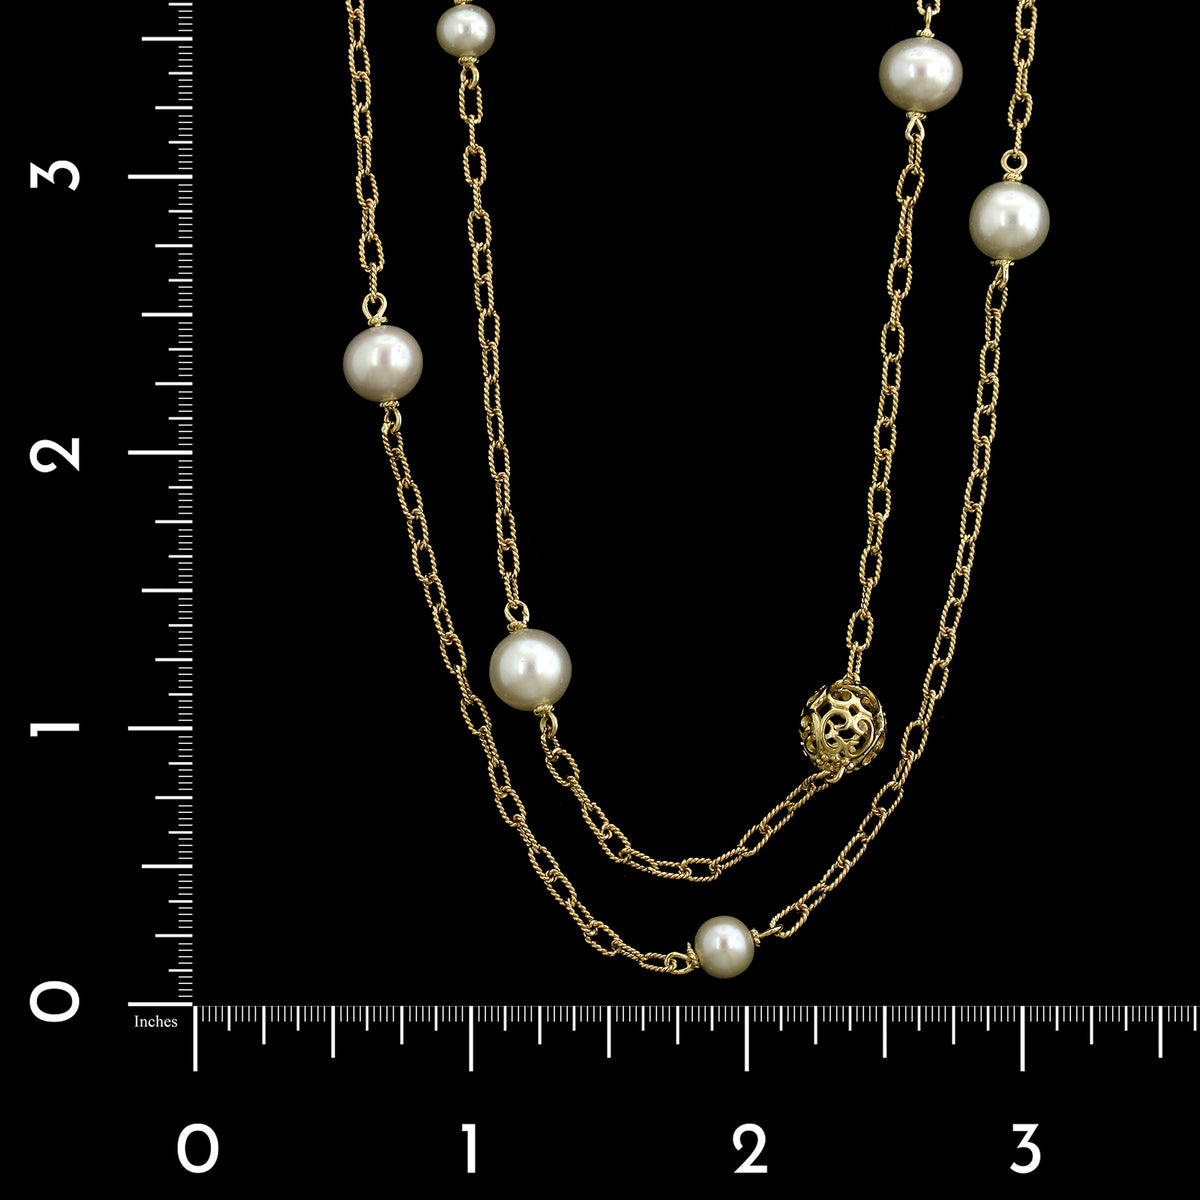 14K Yellow Gold Estate Cultured Freshwater Pearl Double Row Necklace